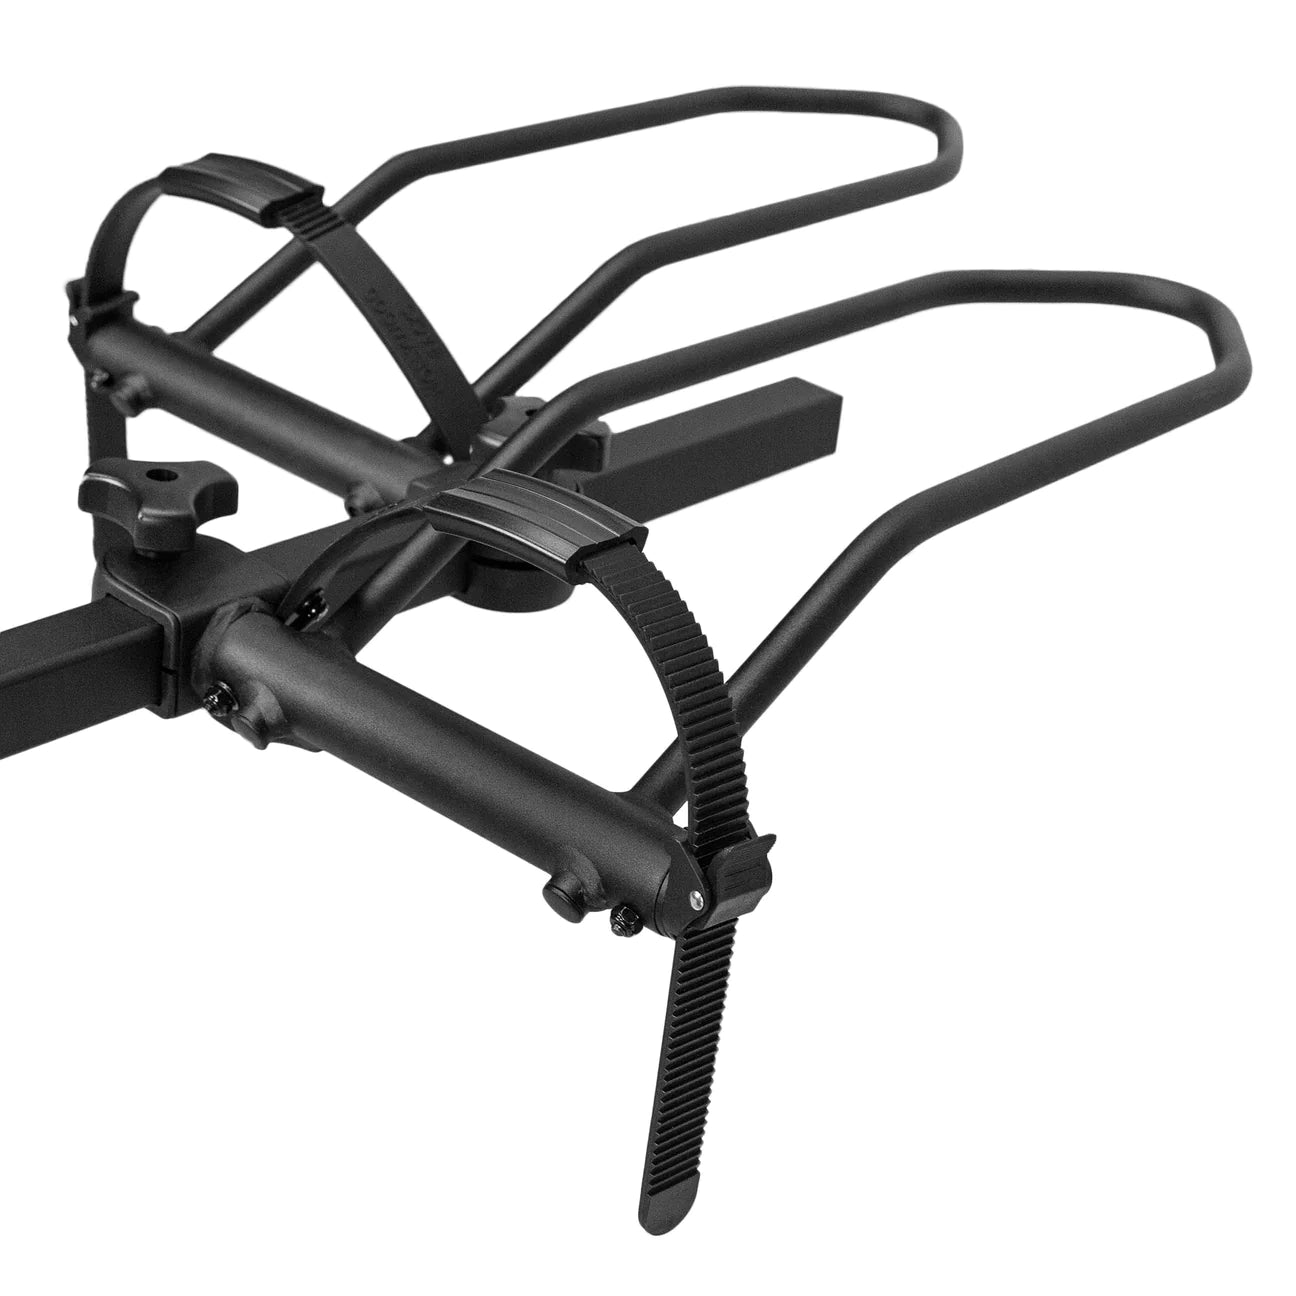 Hollywood Racks Sport Rider For Regular and Fat Electric Bikes (2" & 1-1/4") - HR1560